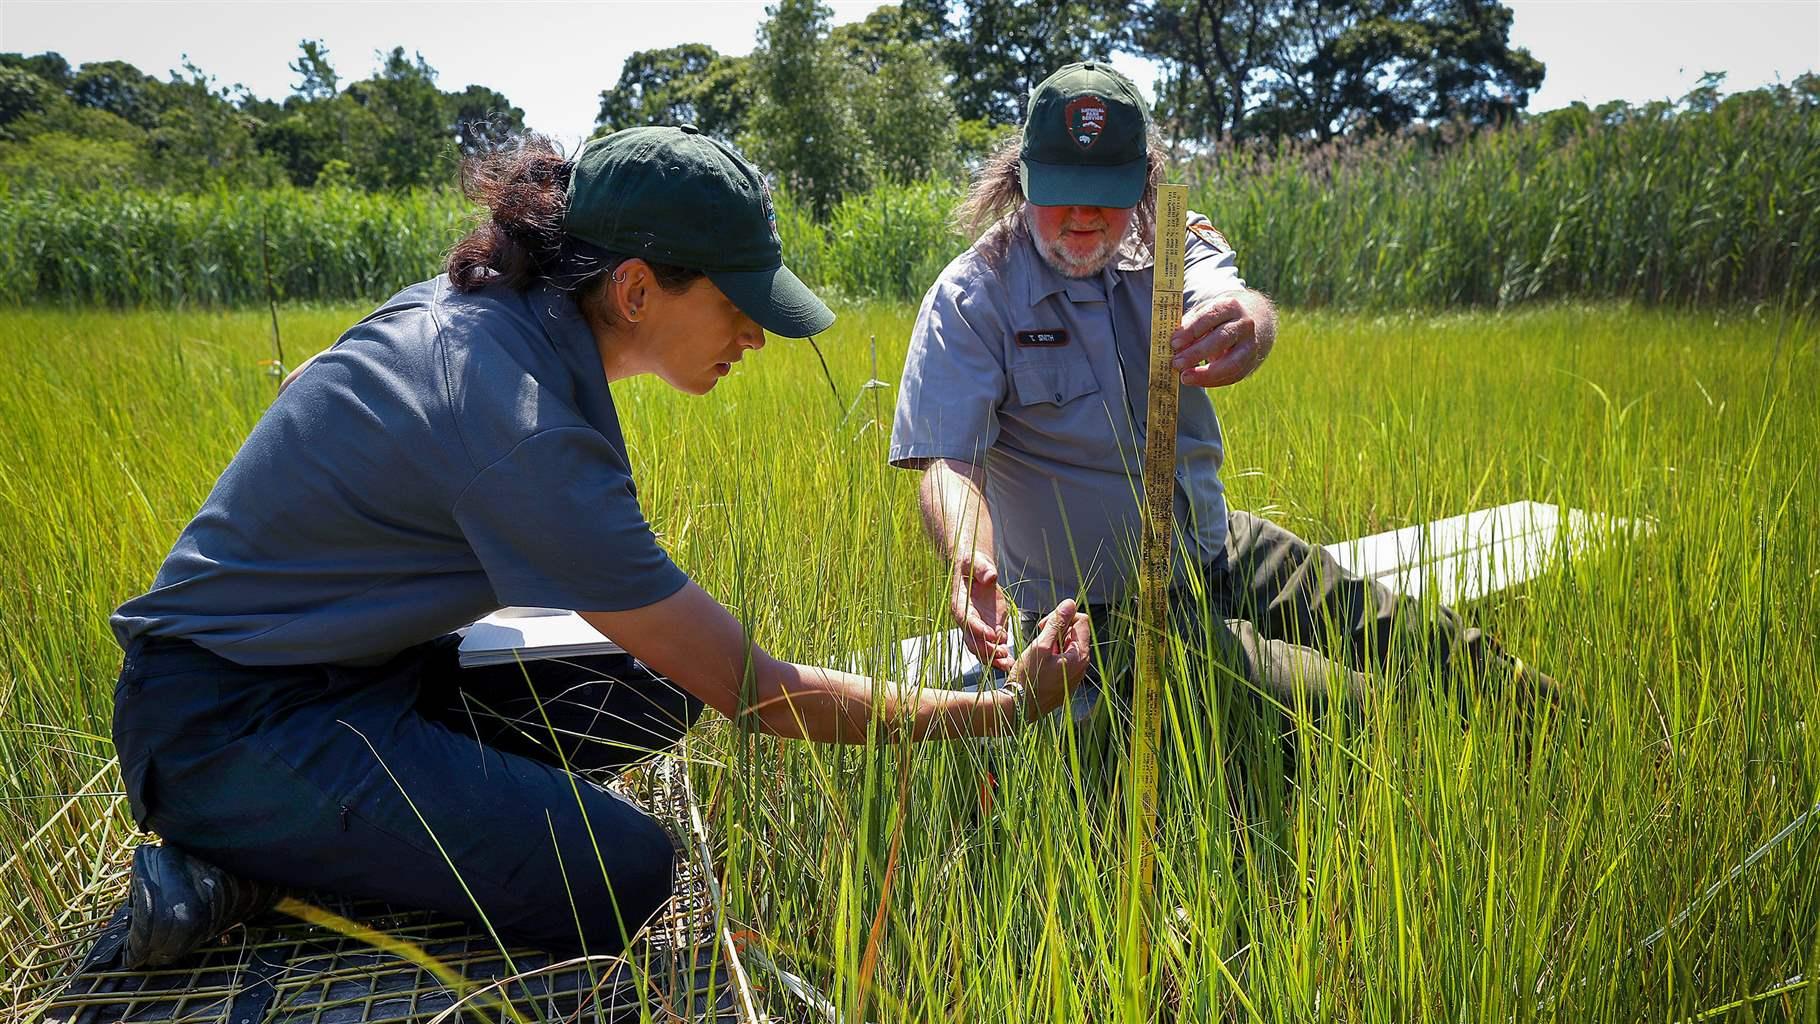 A woman and a man dressed in National Park Service uniforms and caps kneel in a green tree-lined marsh and use a yardstick and other gear to closely examine the vegetation under bright sunshine.